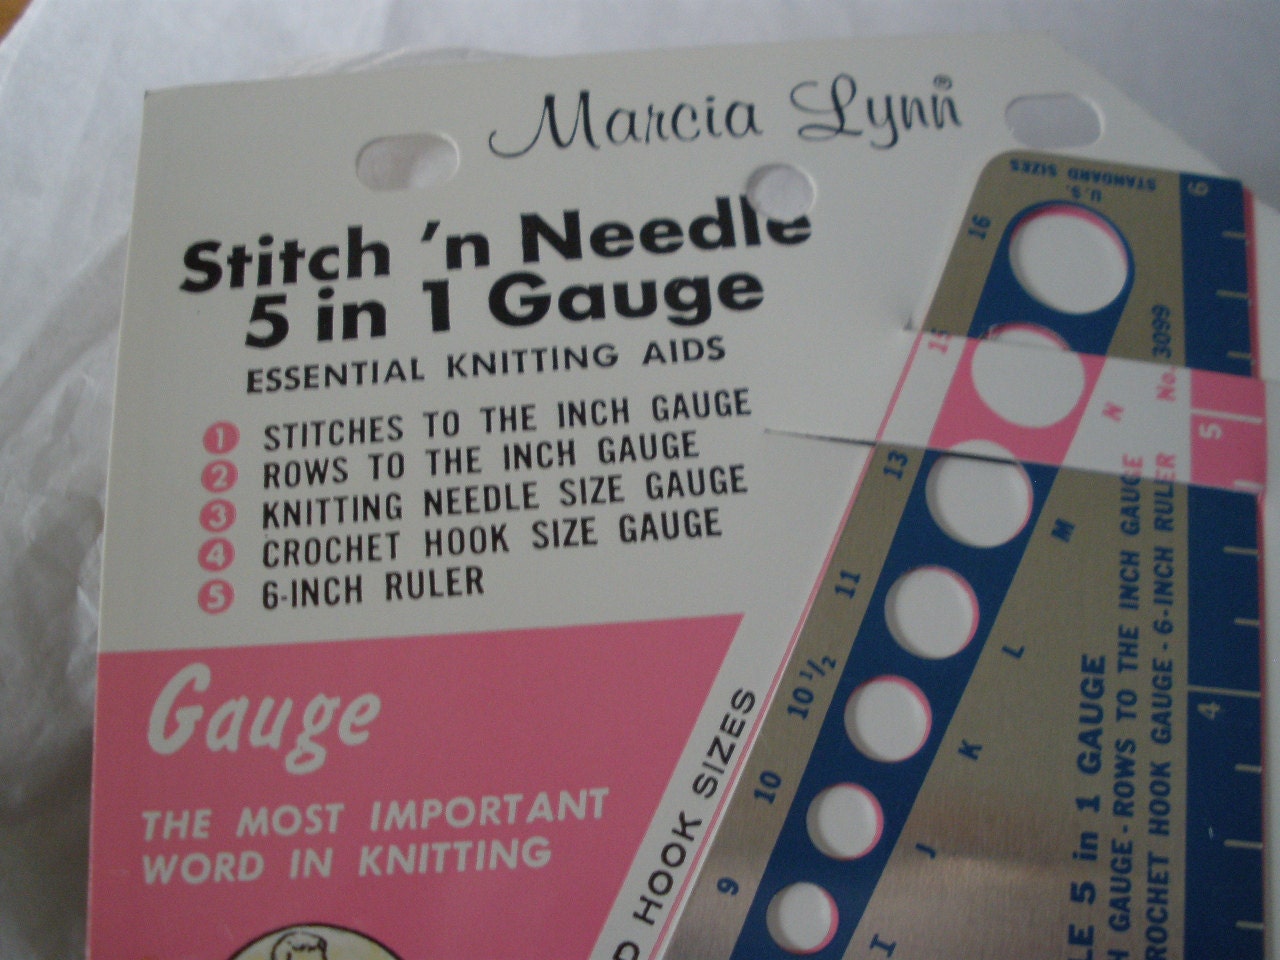 Cool Vintage Tools Stitch 'n Needle 5 in 1 Gauge Marcia Lynn Made in USA  Gauge, the Most Important Word in Knitting 